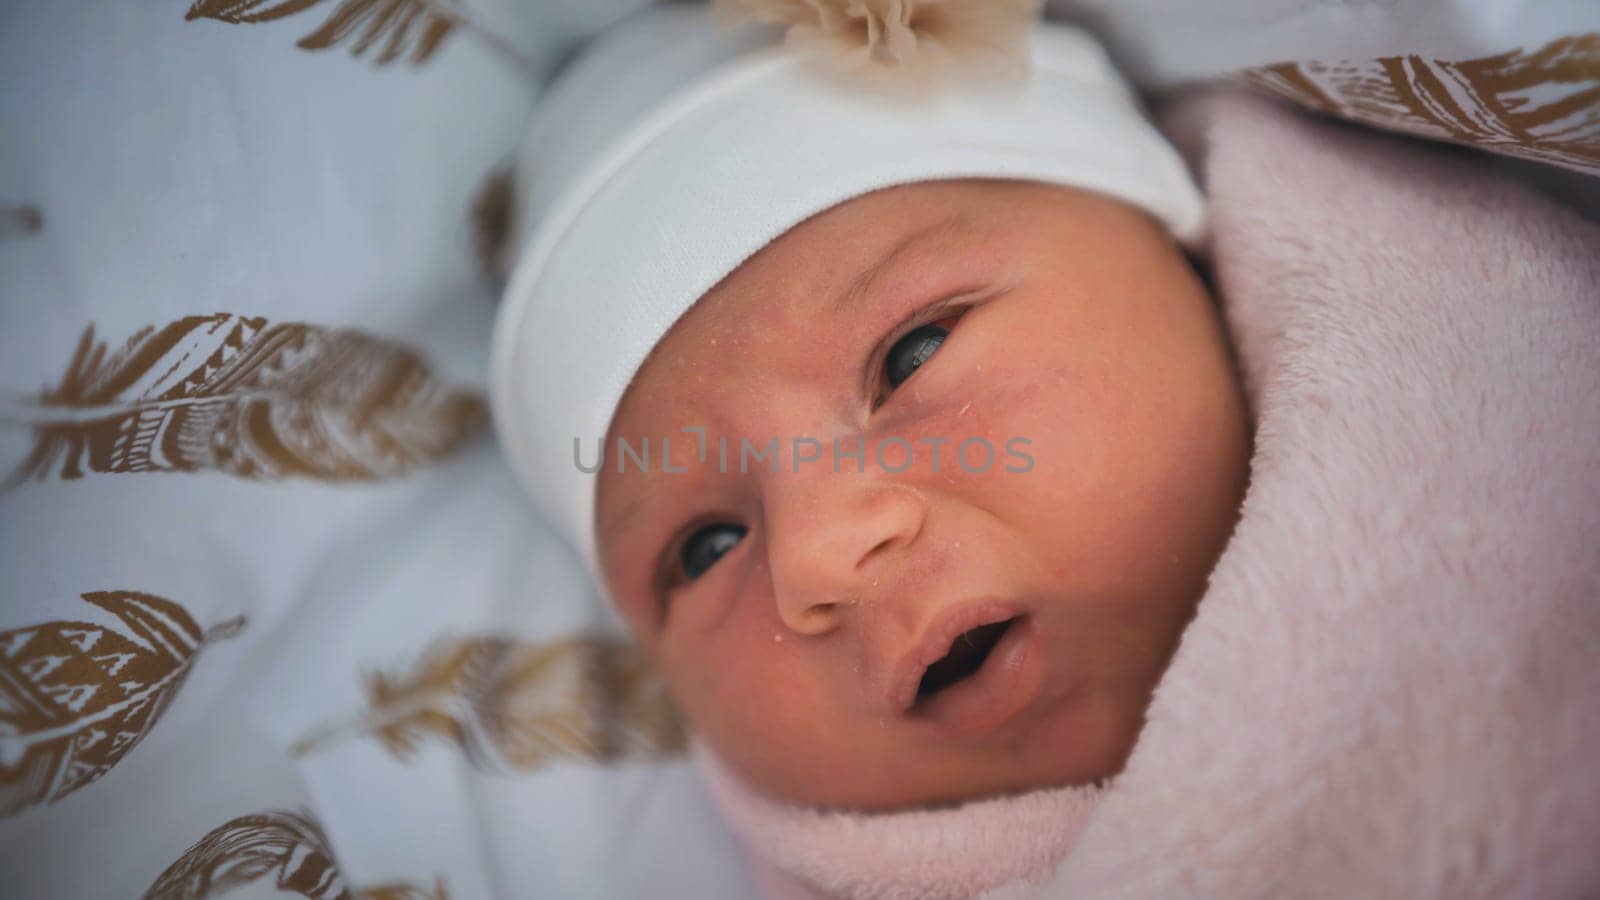 A newborn baby wrapped up in a maternity hospital and looking fo by DovidPro